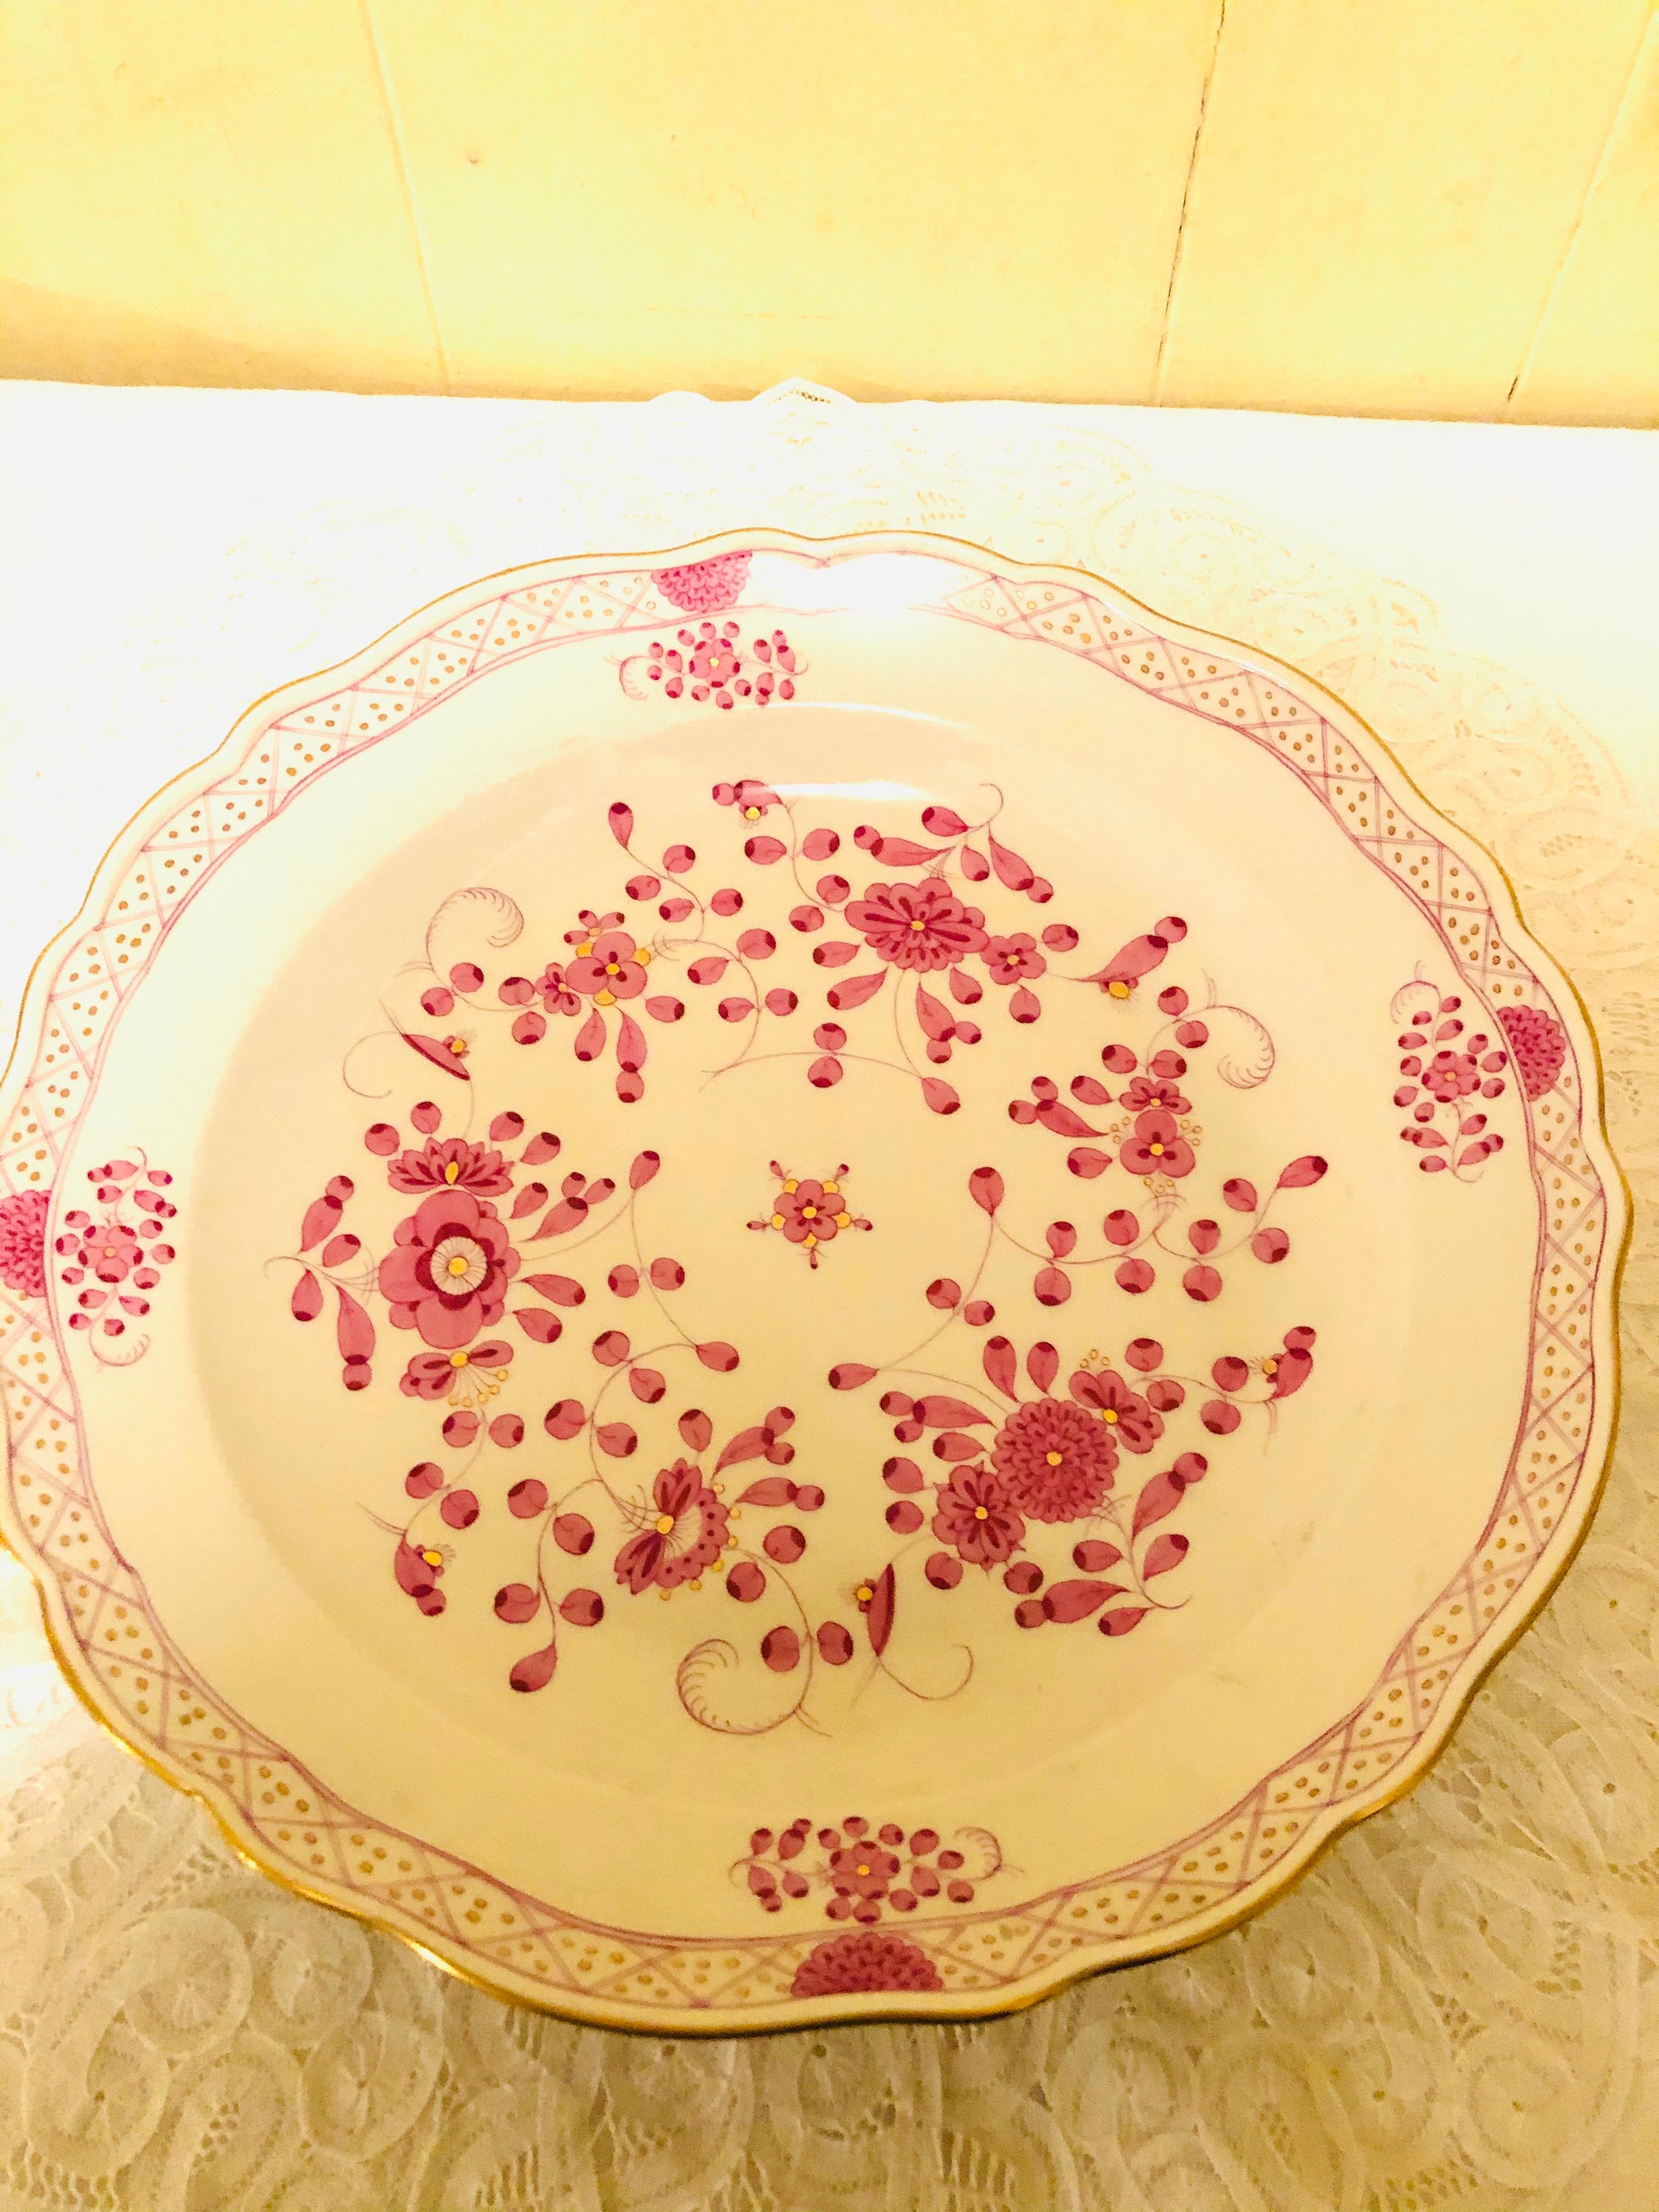 I would like to offer you this beautiful large round platter in the Meissen purple Indian pattern. It has detailed paintings of pink flowers with some purple and gold accents on a white ground. The detail of the painting on this round platter is